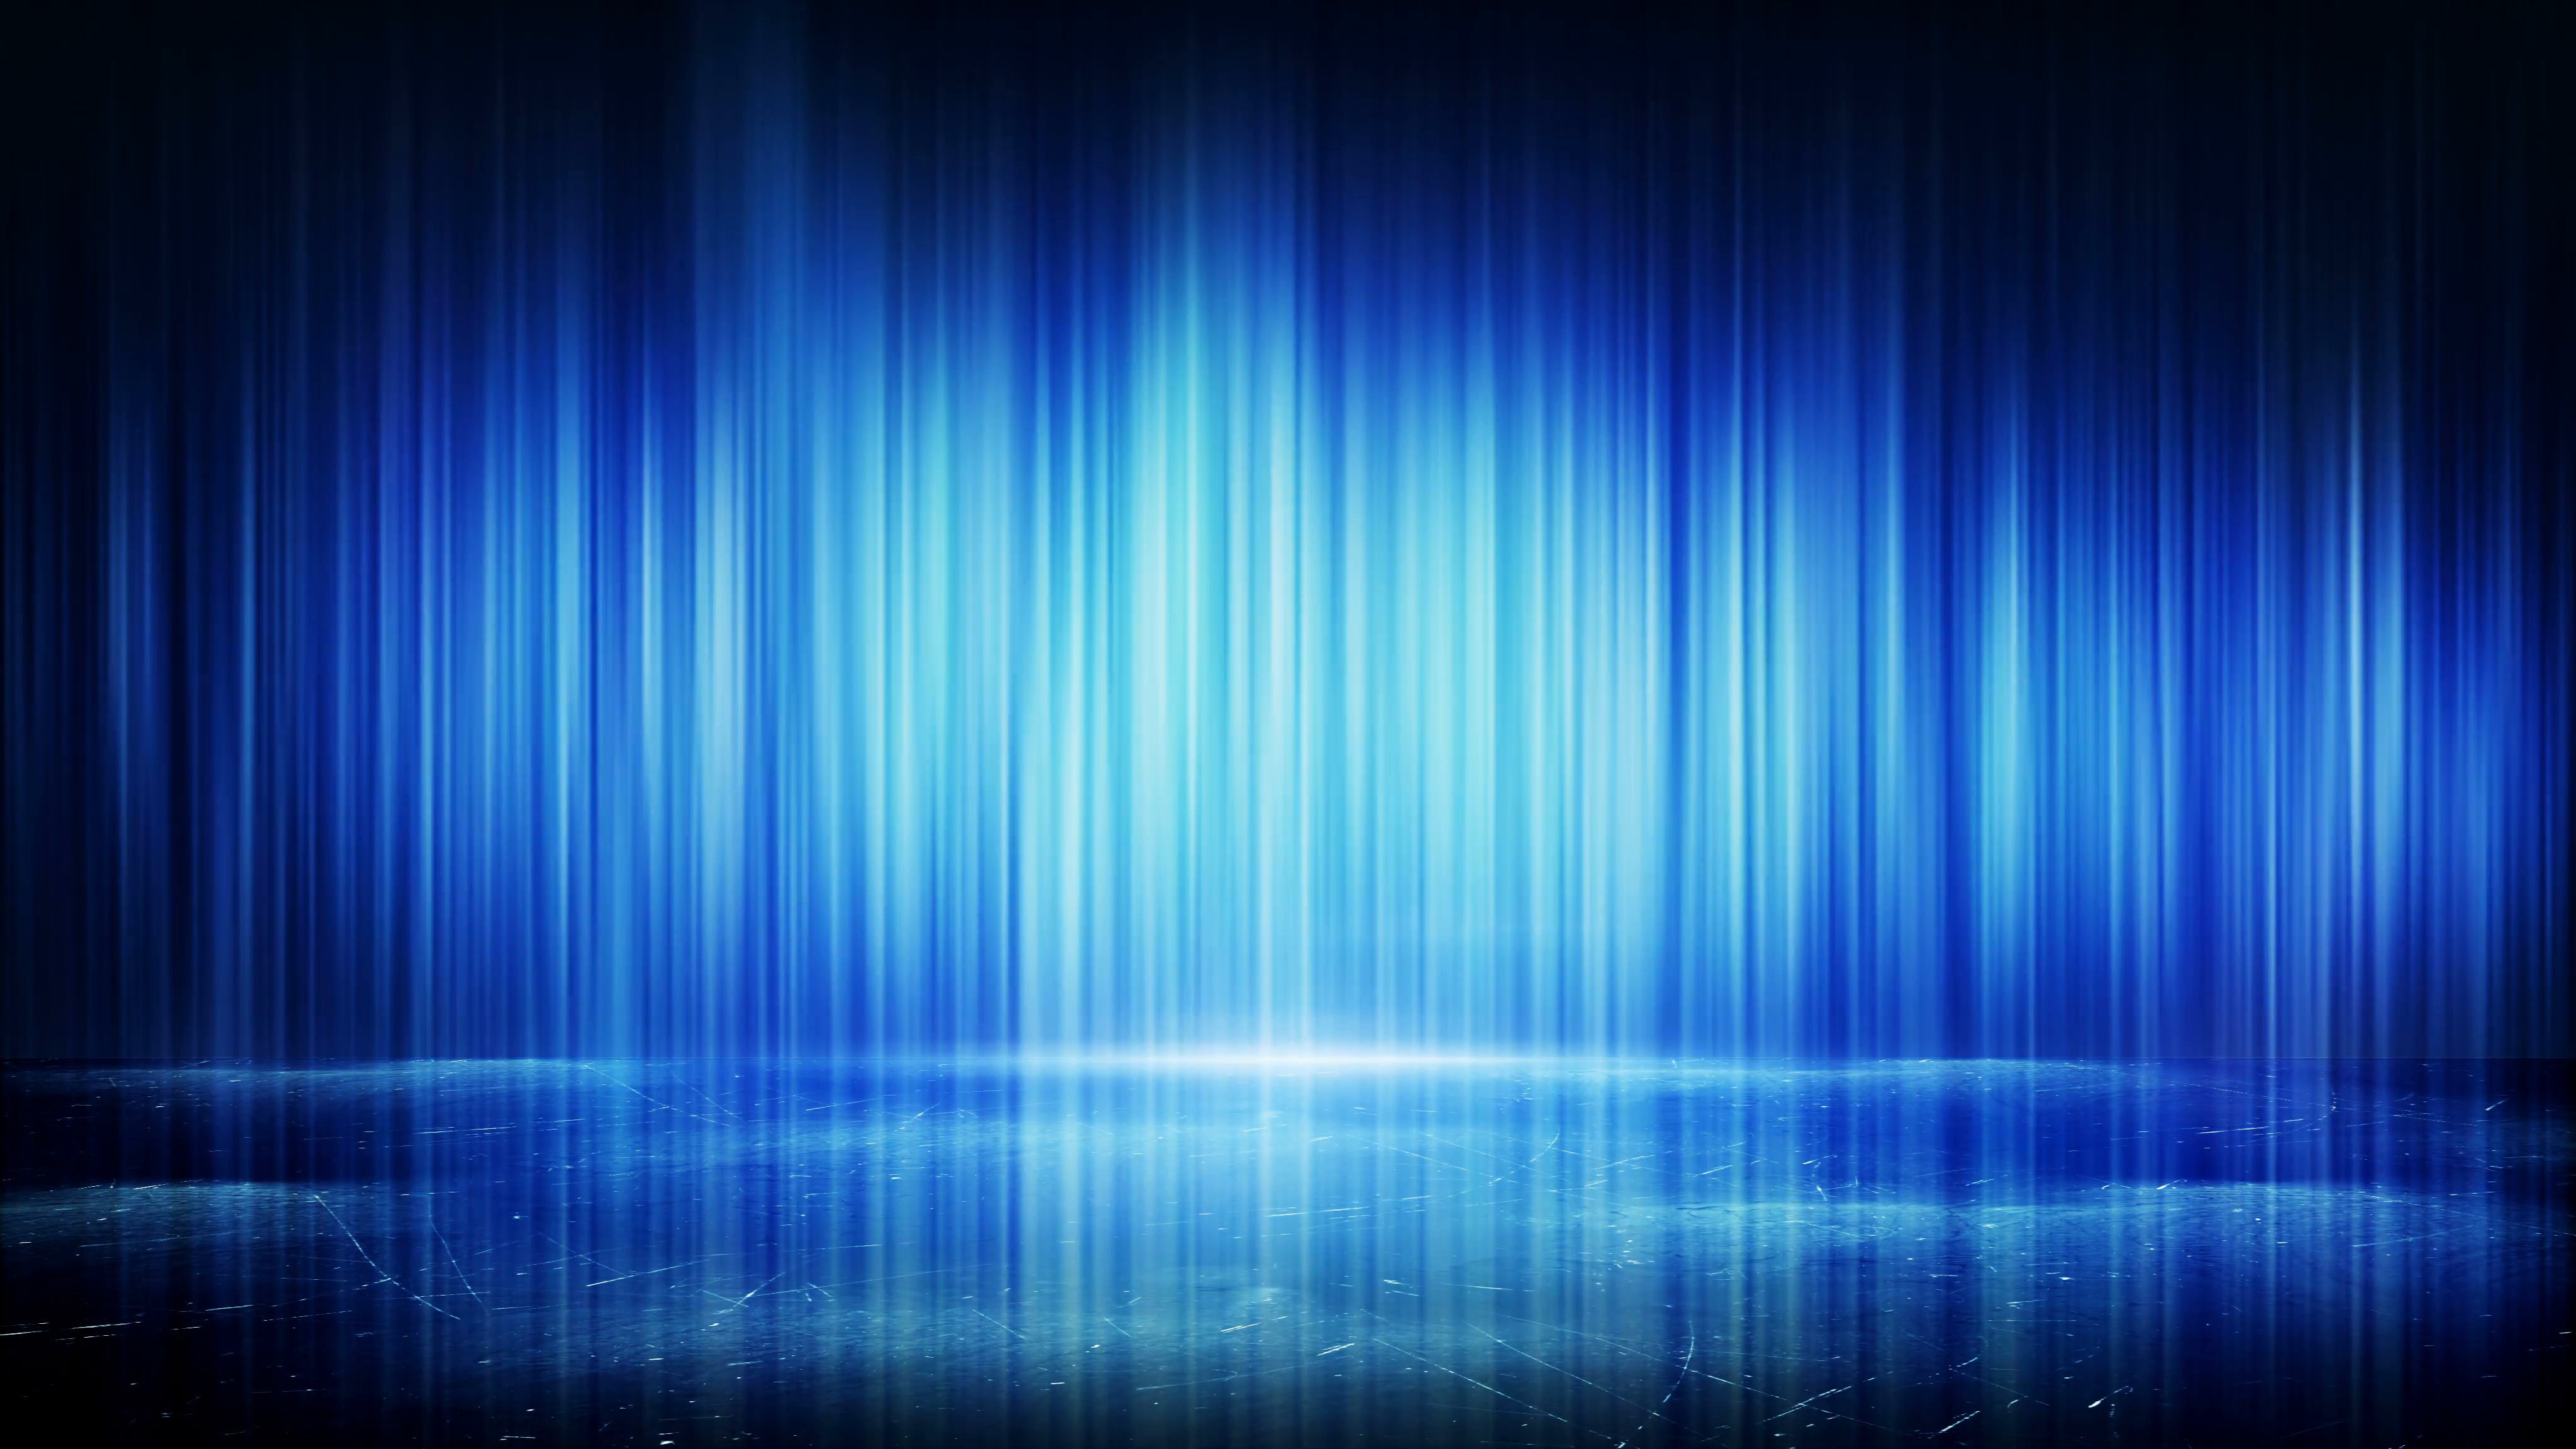 blue light lines and reflection loop background 4k (4096x2304 ...